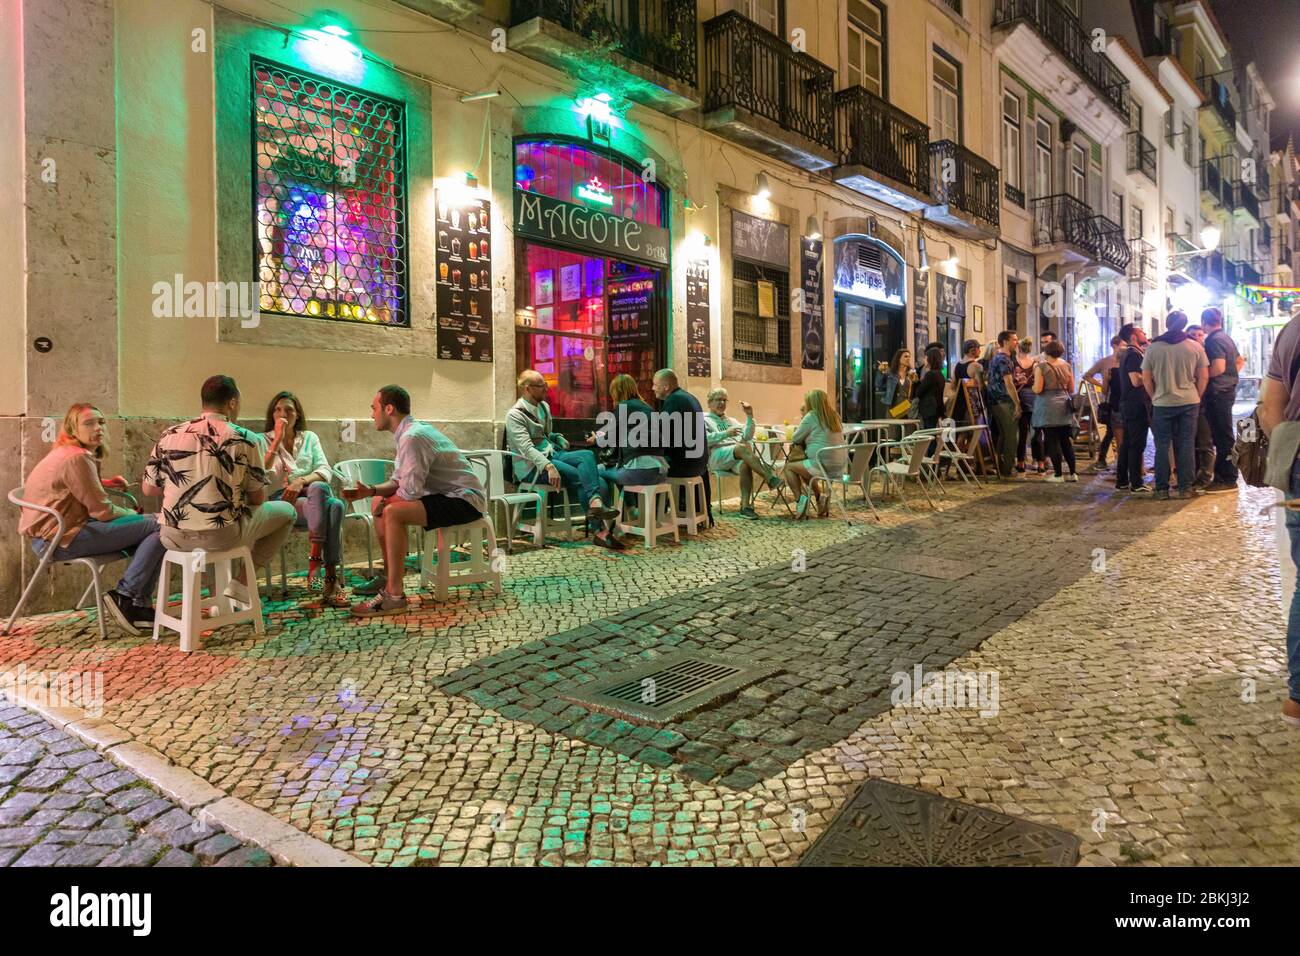 Portugal, Lisbon, Bairro Alto district, Bairro Alto is one of the busiest areas of Lisbon at night with a high concentration of bars and restaurants Stock Photo